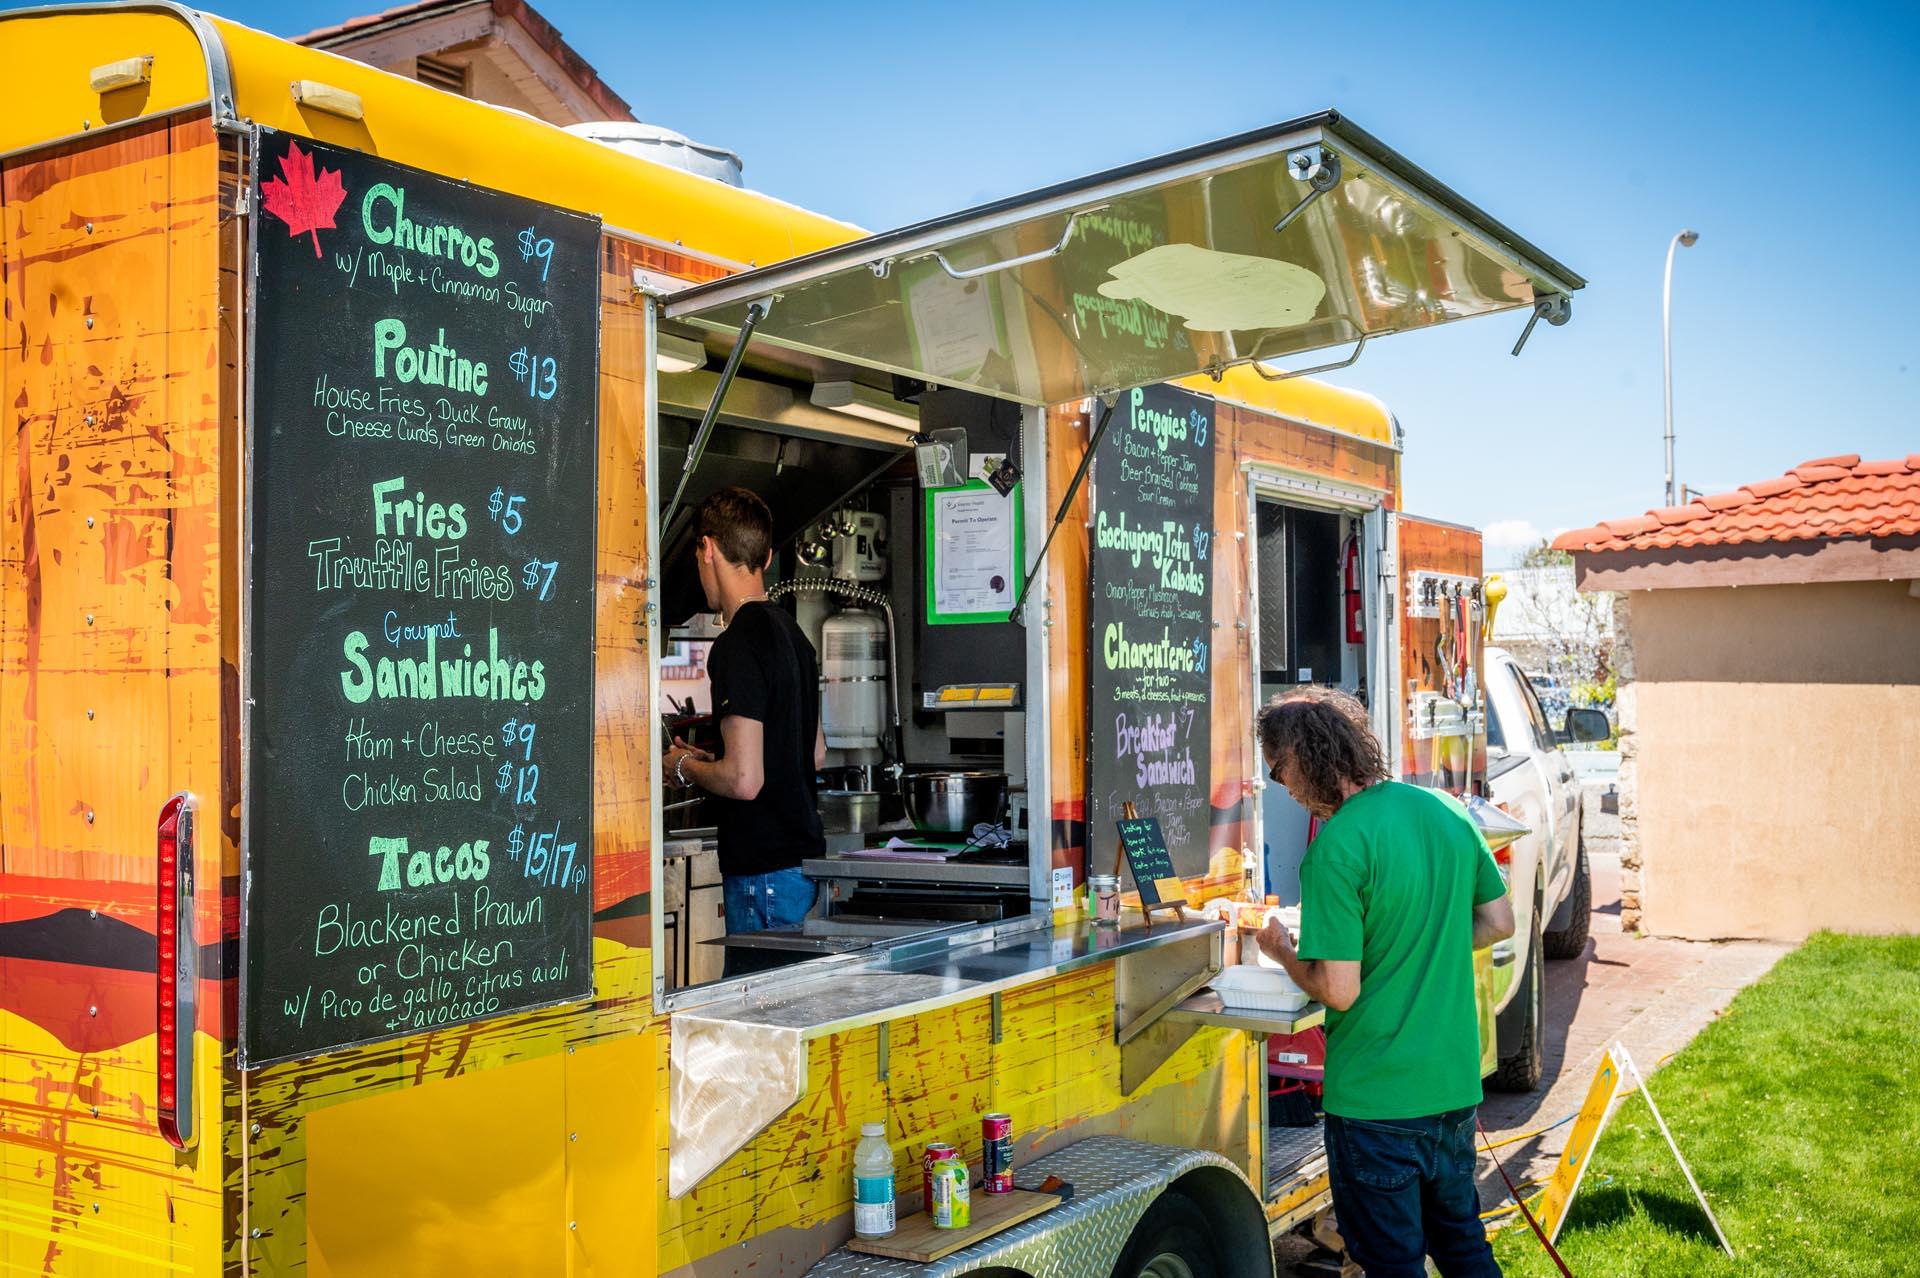 5 Law of Attraction Food Truck